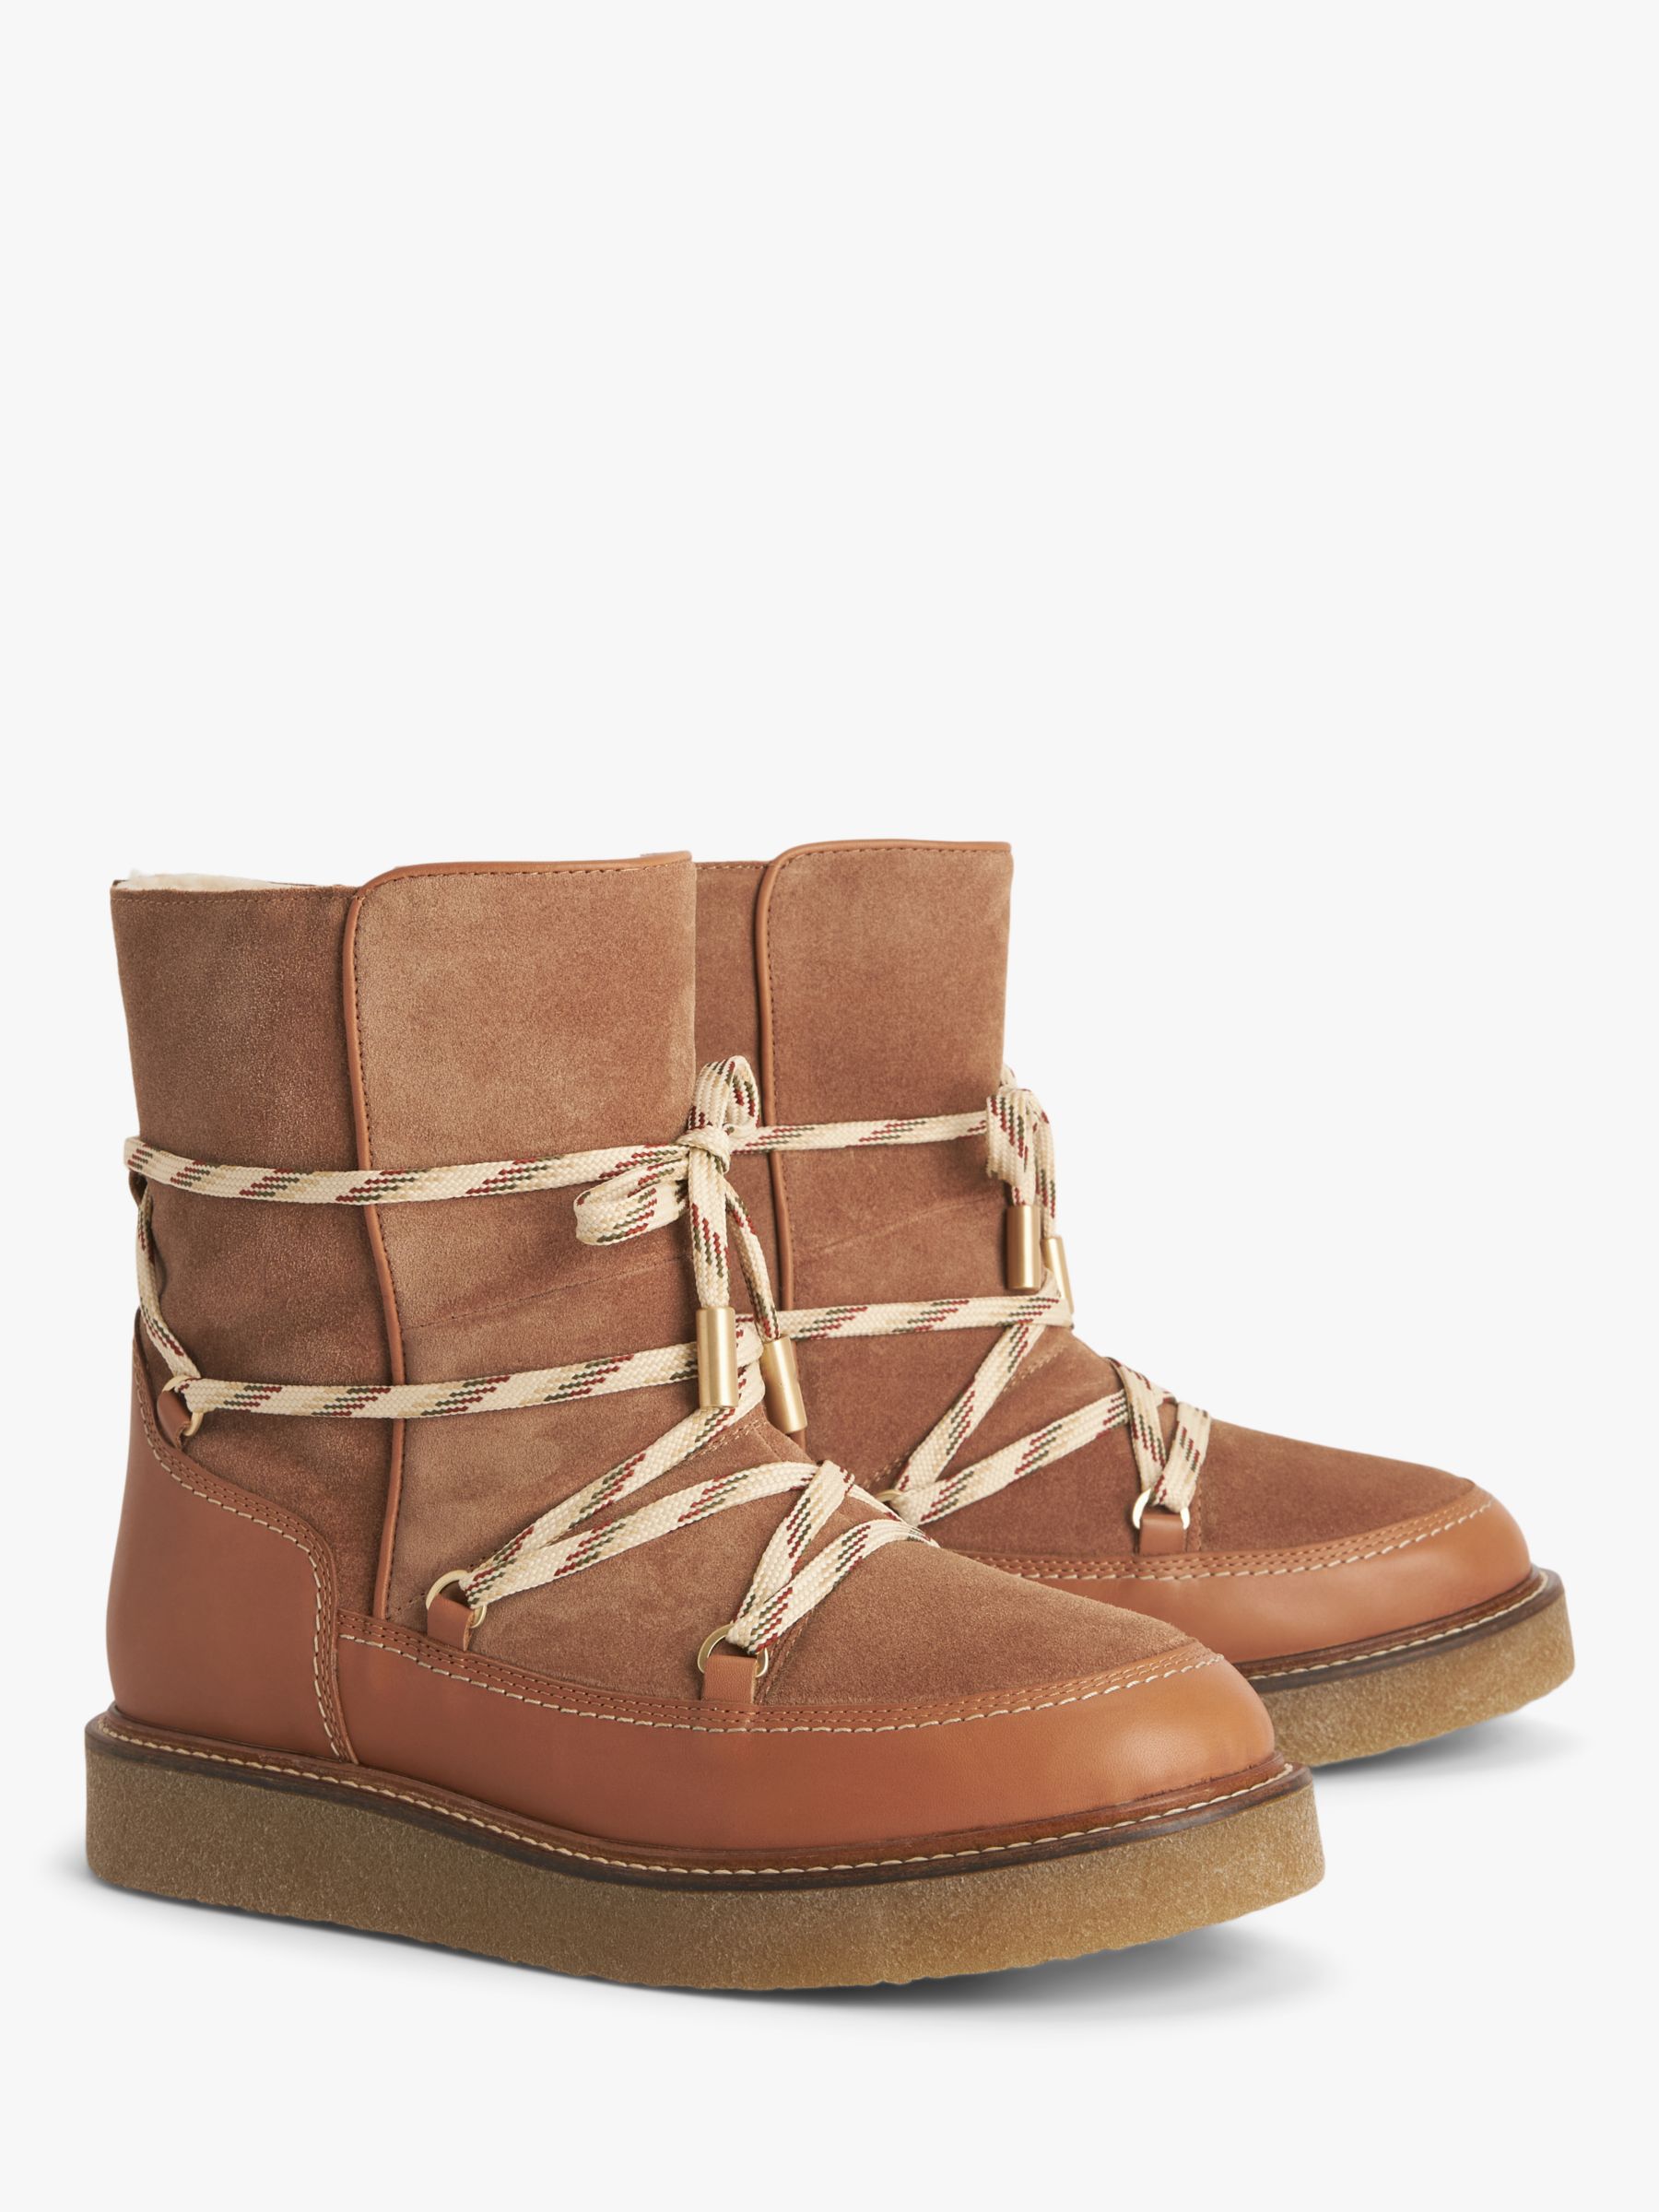 AND/OR Pilot Leather/Suede Lace Up Crepe Sole Snow Boots, Brown/Tan price was £159.00, price now £95.40